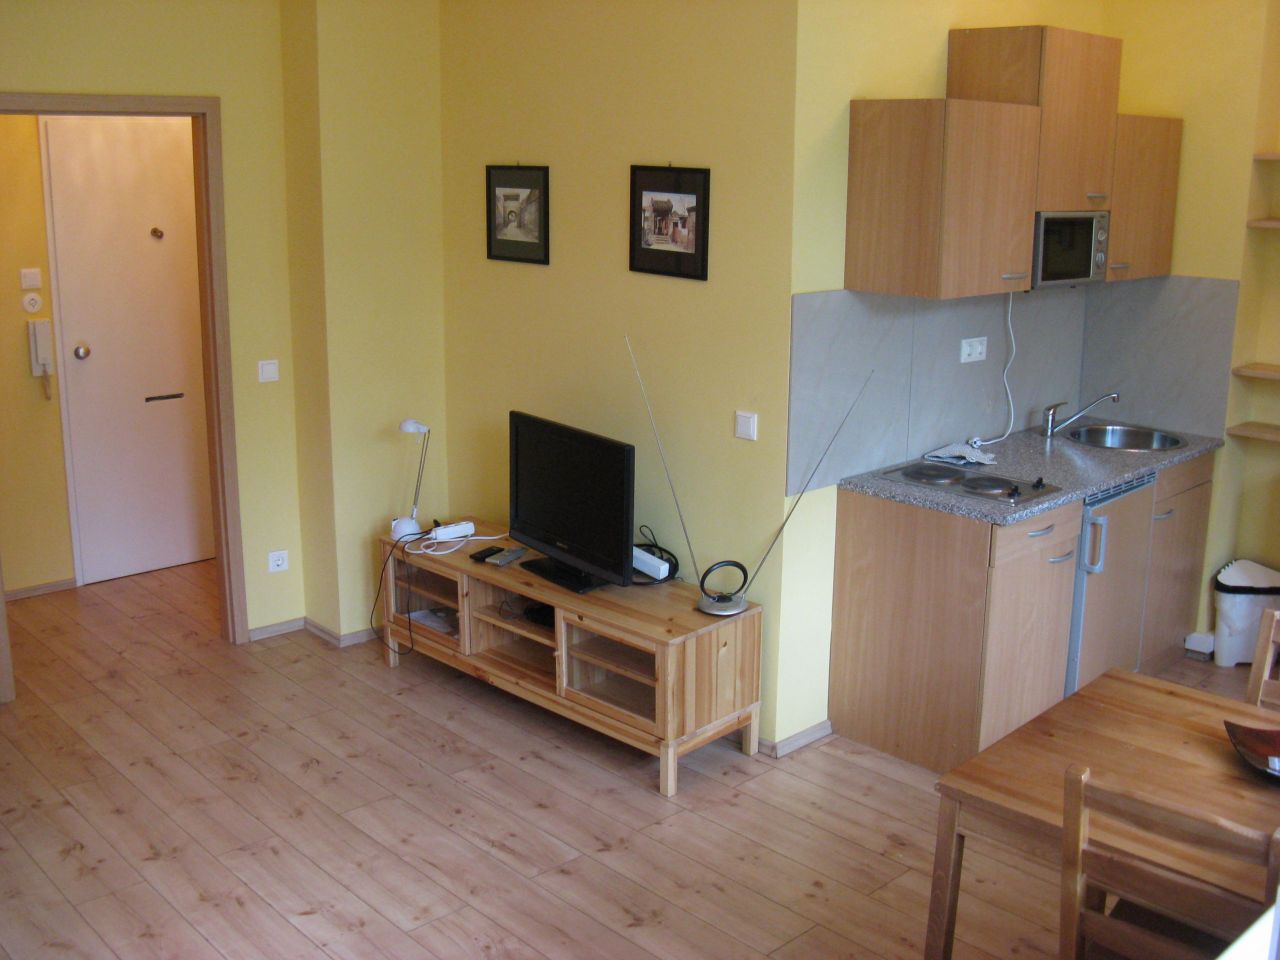 Apartment in Berlin, Germany, 32.06 sq.m - picture 1